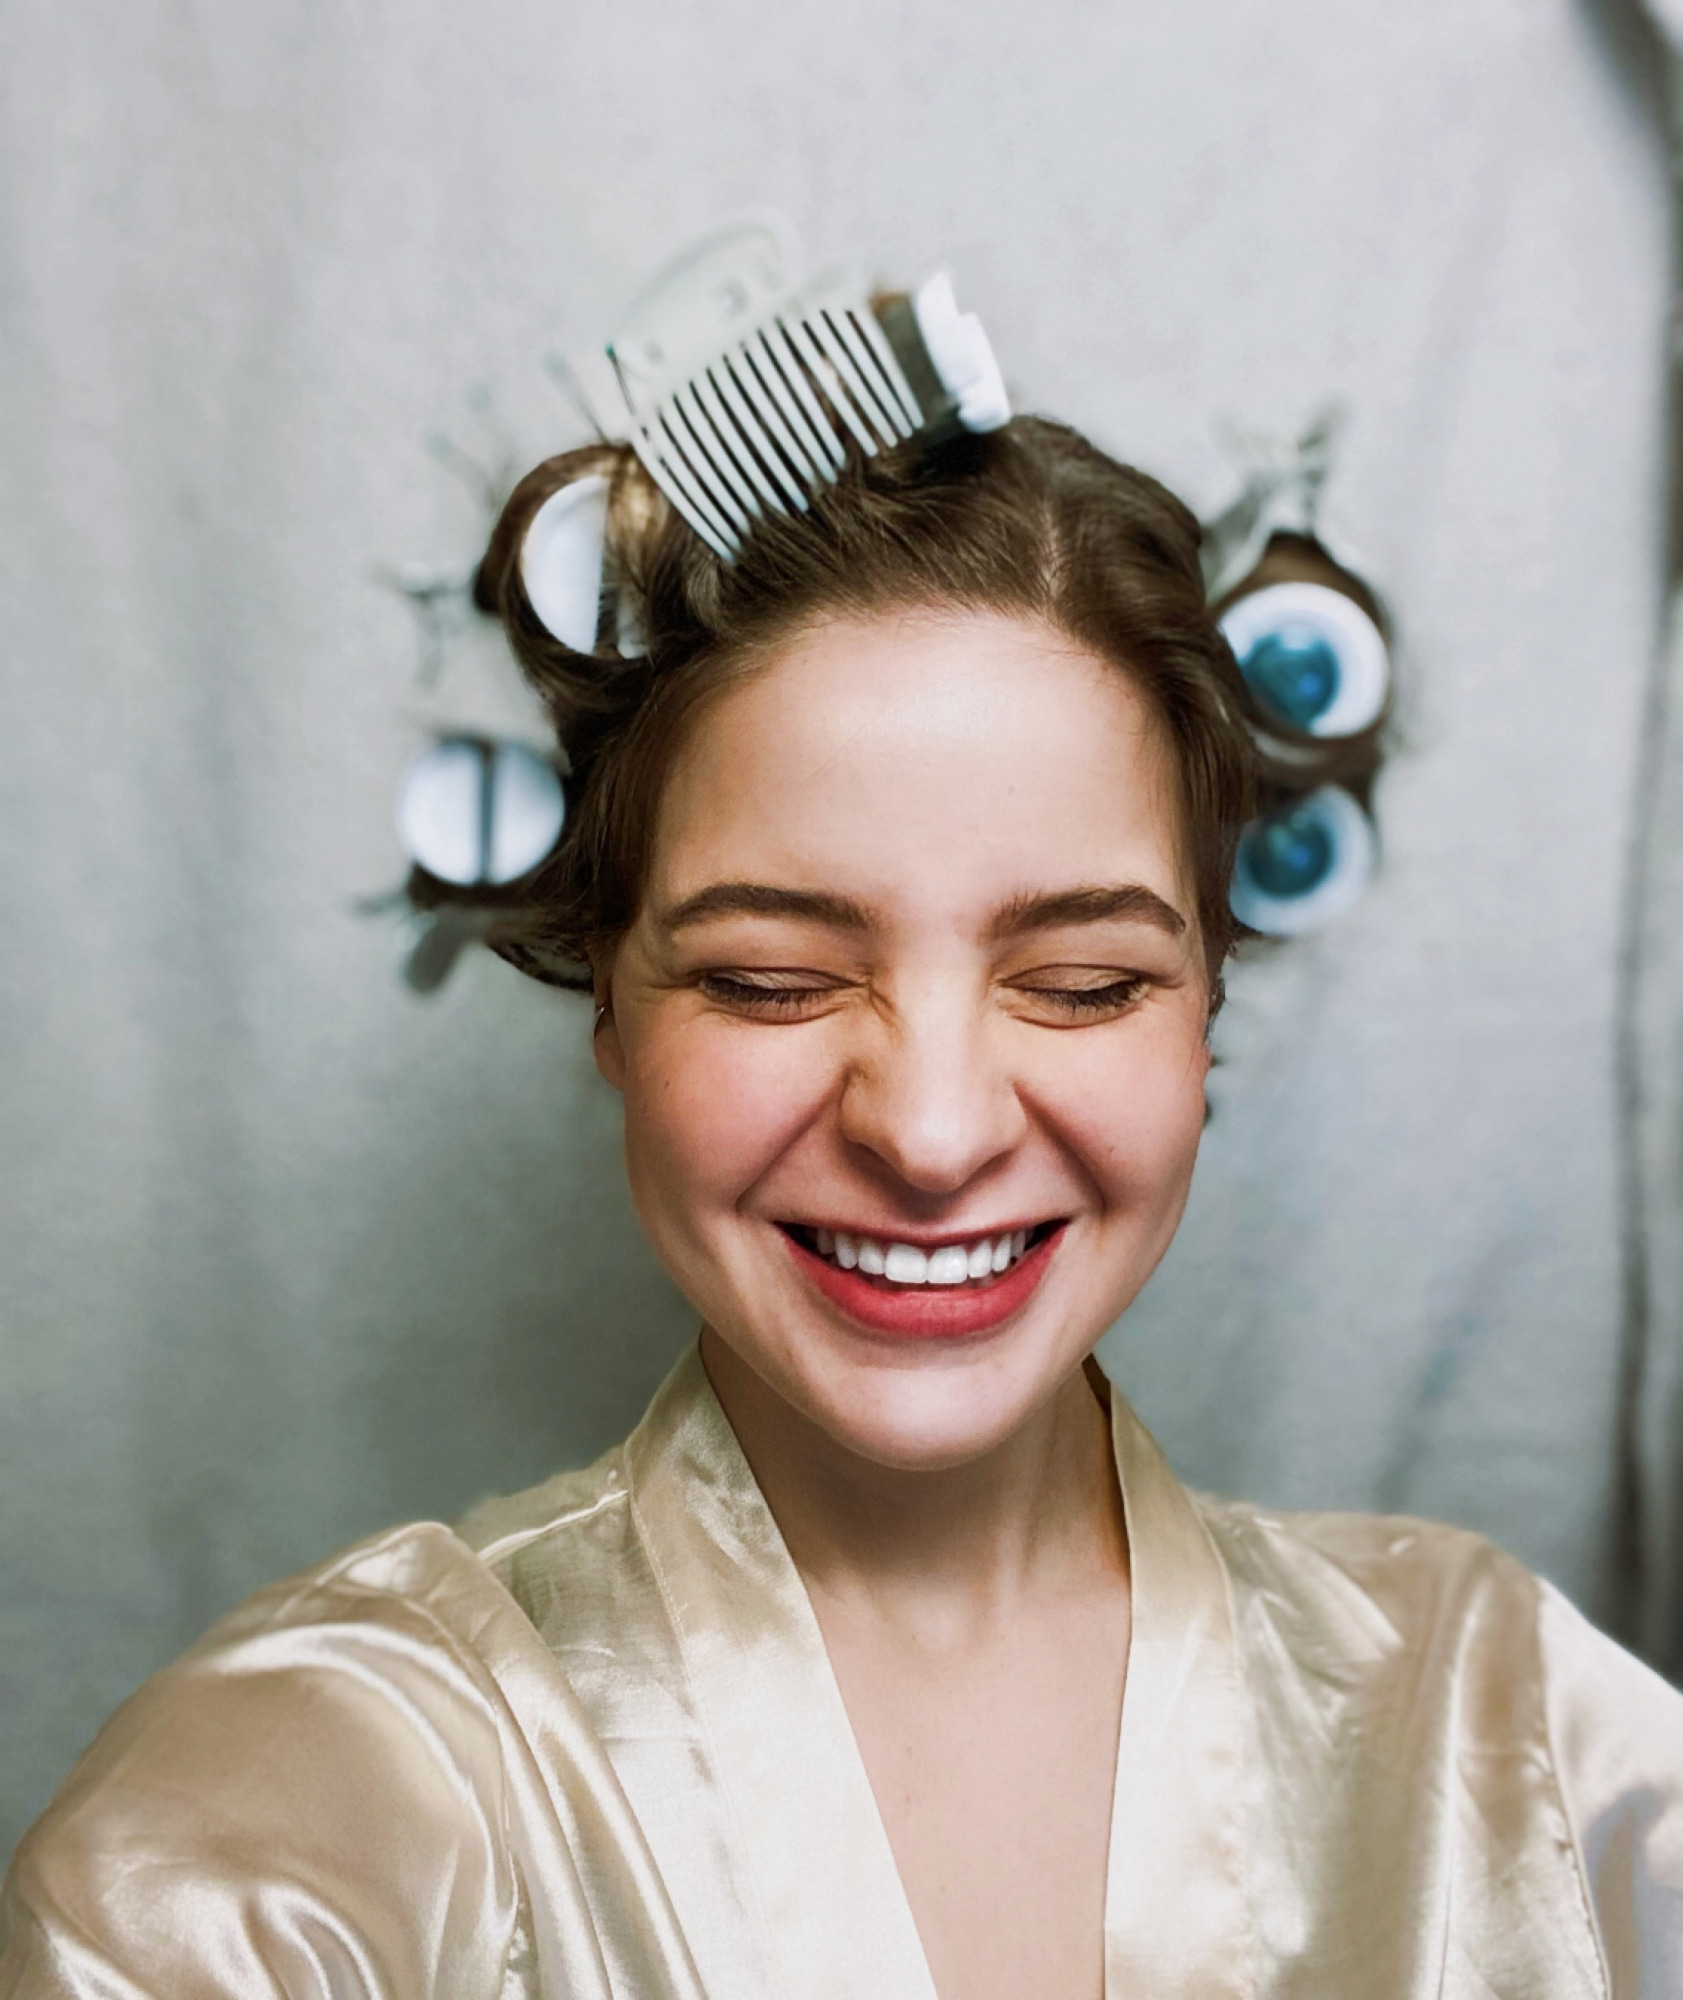 how to use hair rollers